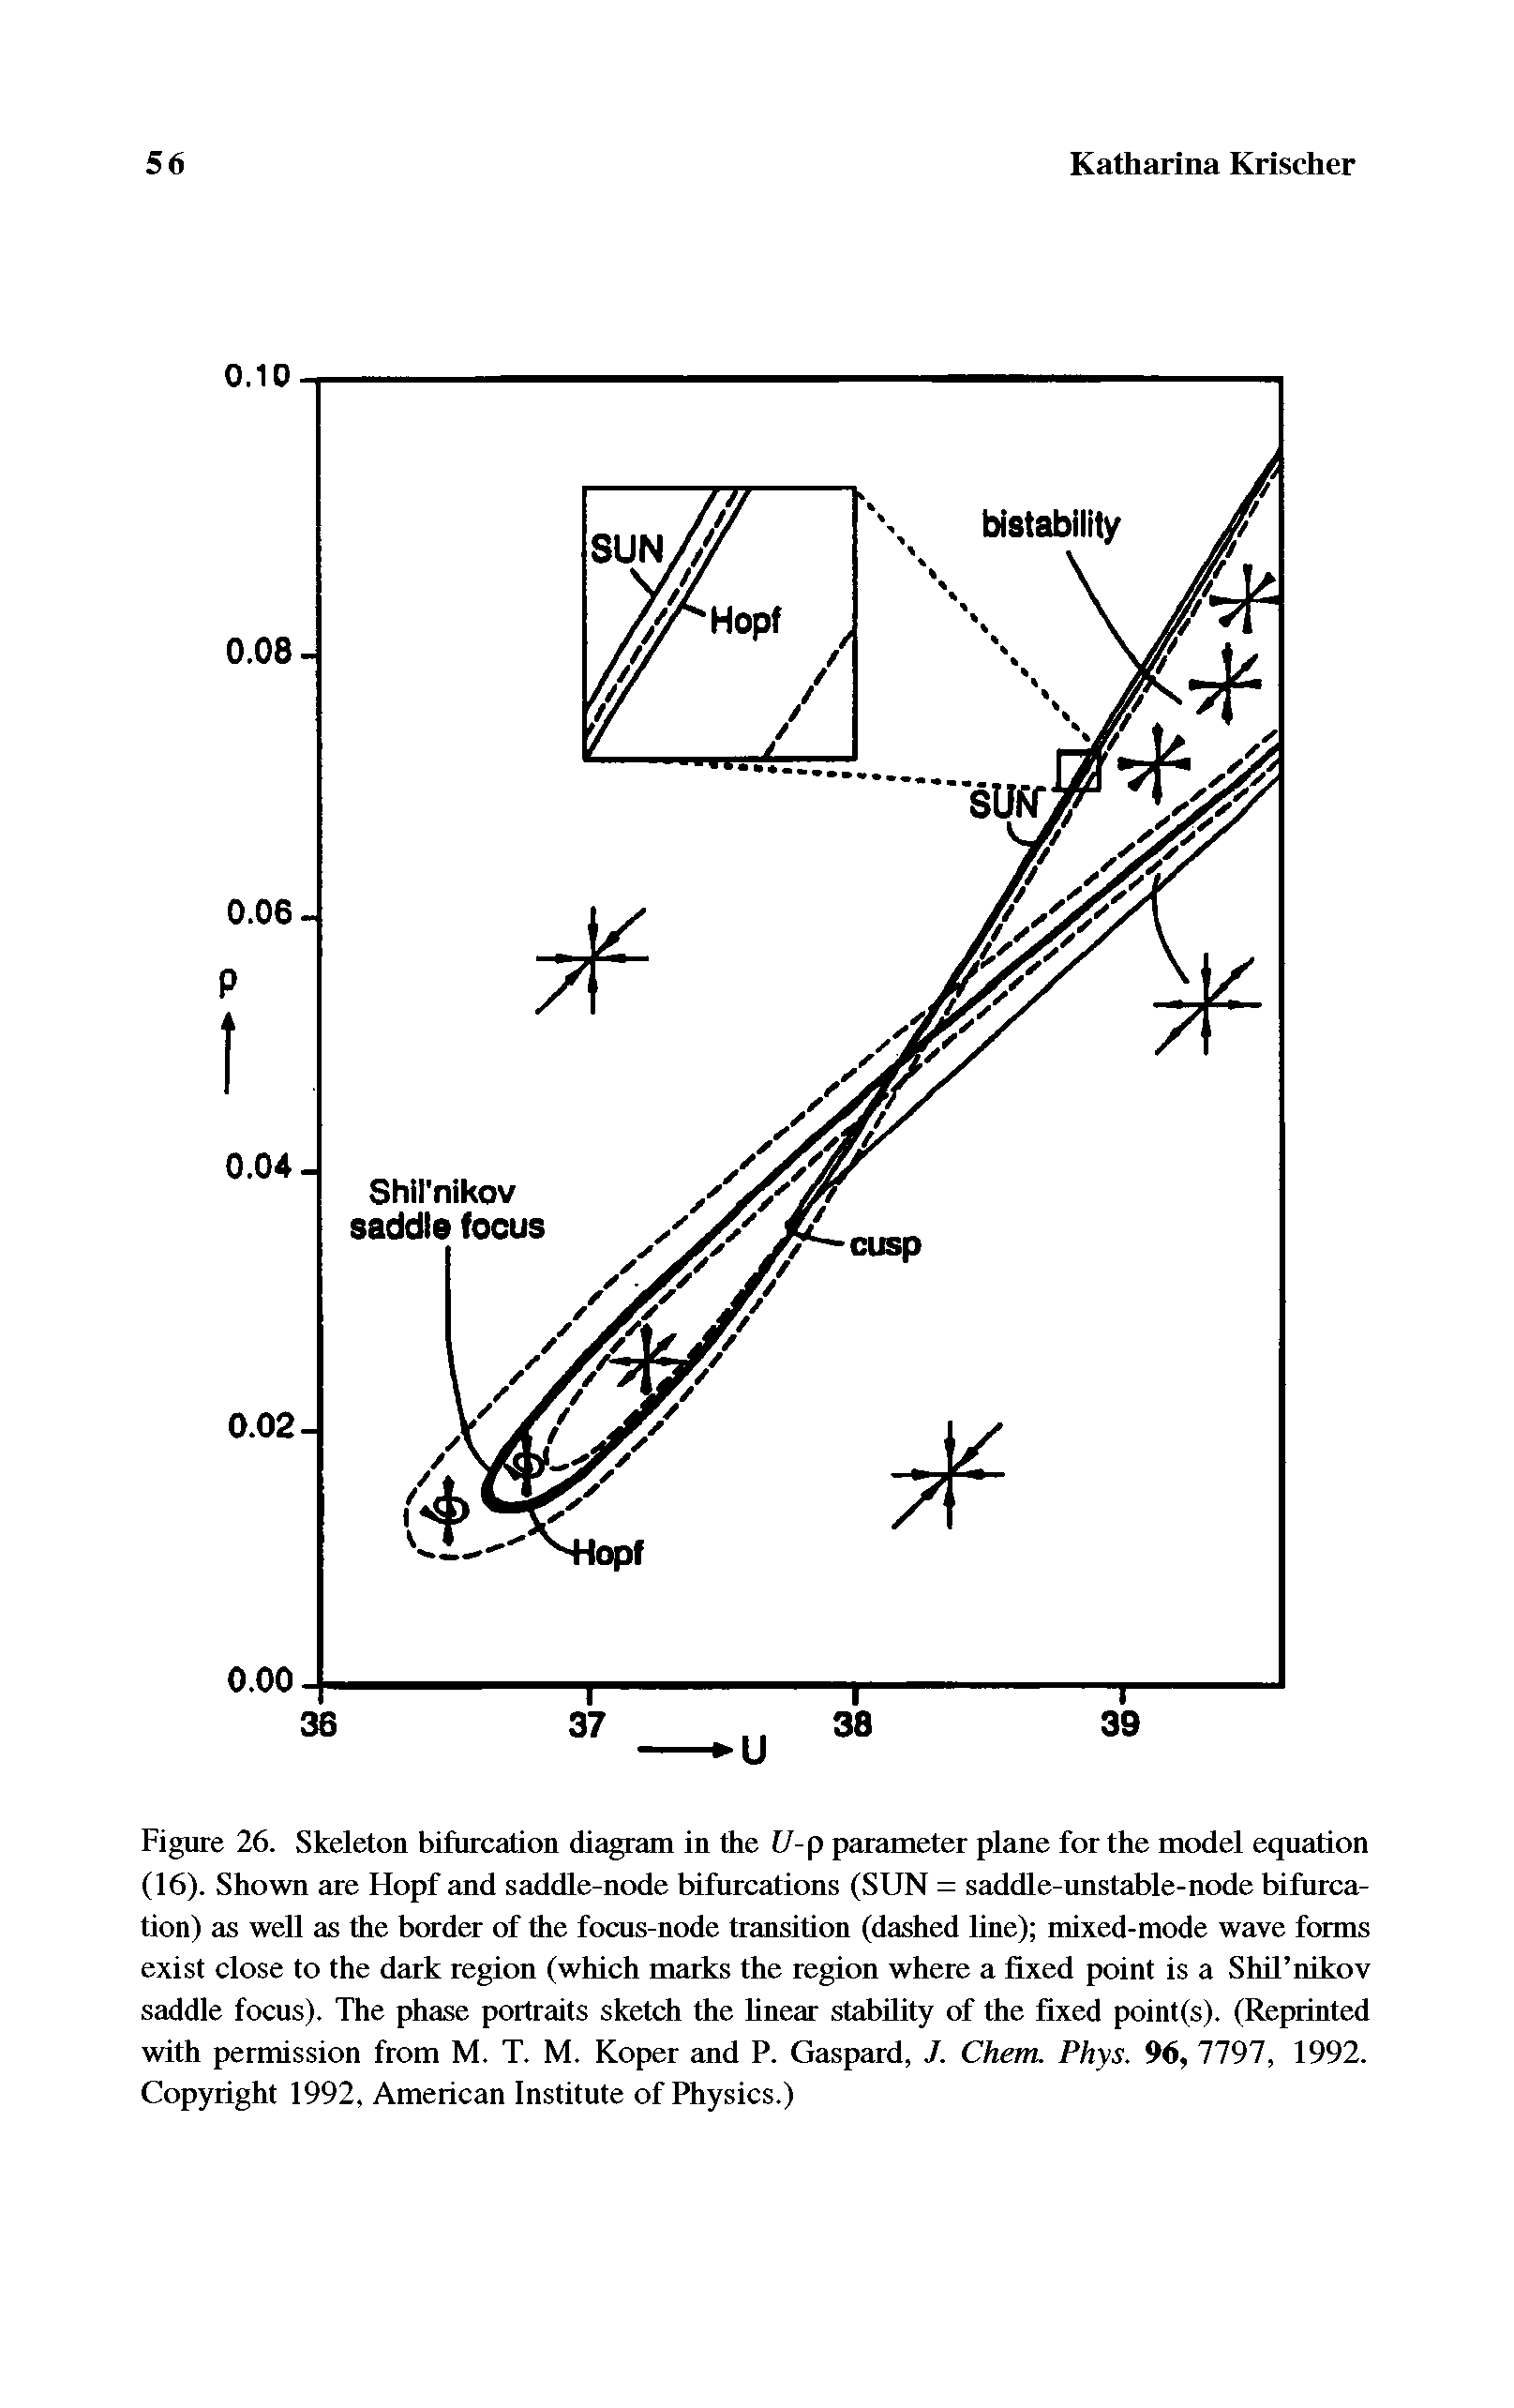 Figure 26. Skeleton bifurcation diagram in the t/-p parameter plane for the model equation (16). Shown are Hopf and saddle-node bifurcations (SUN = saddle-unstable-node bifurcation) as well as the border of the focus-node transition (dashed line) mixed-mode wave forms exist close to the dark region (which marks the region where a fixed point is a ShQ nikov saddle focus). The phase portraits sketch the Unear stability of the fixed point(s). (Reprinted with permission from M. T. M. Koper and P. Gaspard, J. Chem. Phys. 96, 7797, 1992. Copyright 1992, American Institute of Physics.)...